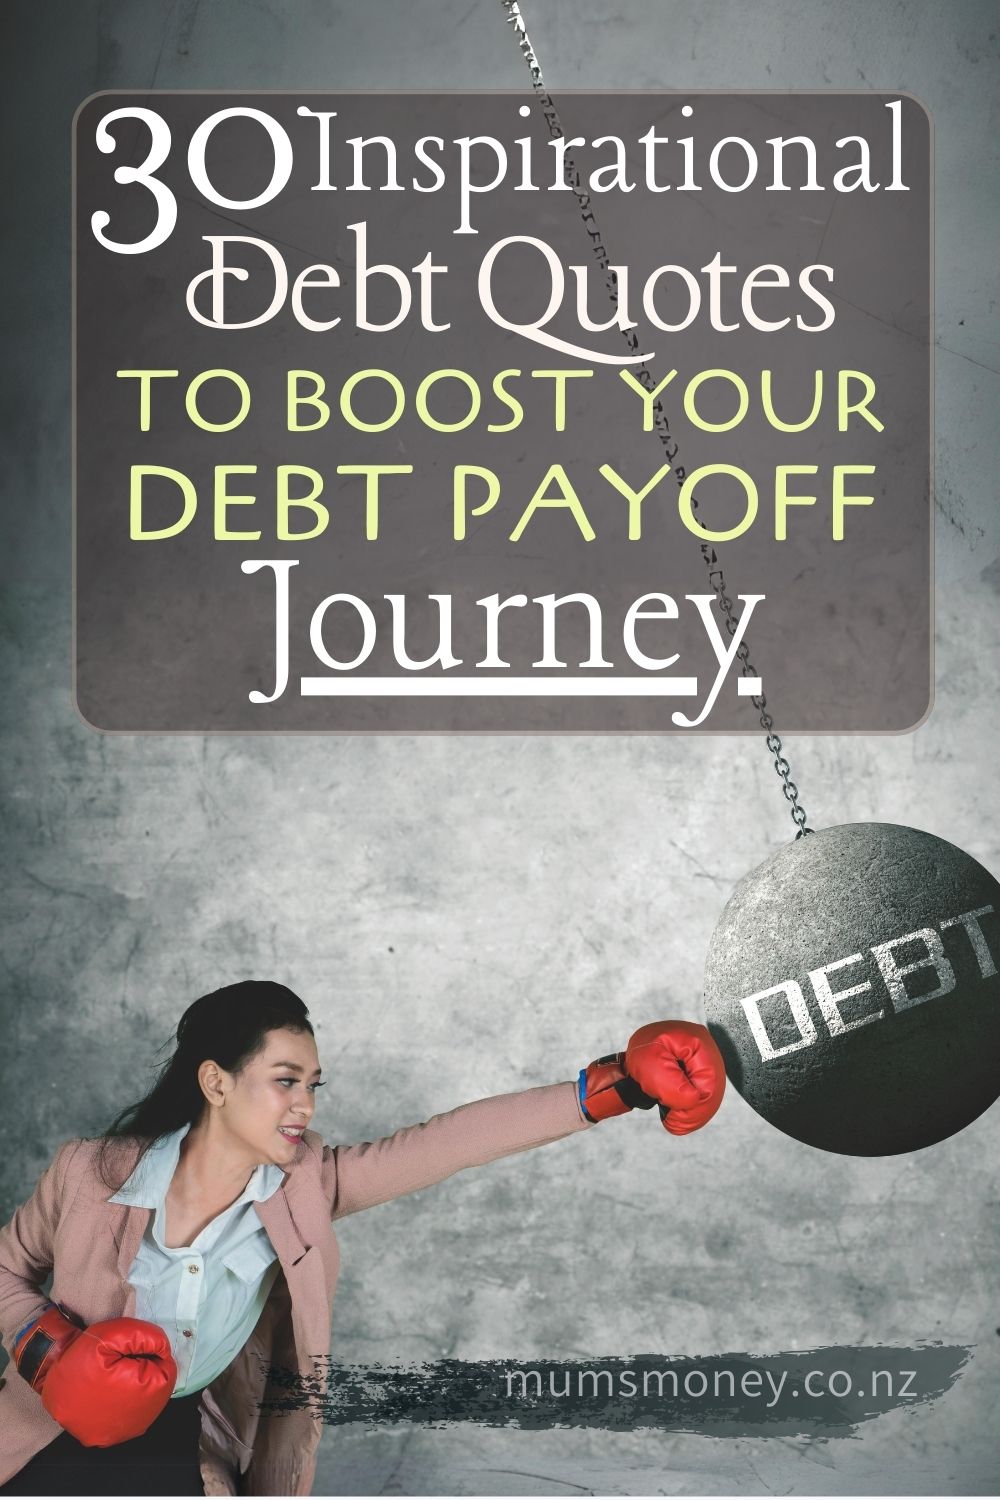 Inspirational Debt Quotes To Boost Your Debt Payoff Journey